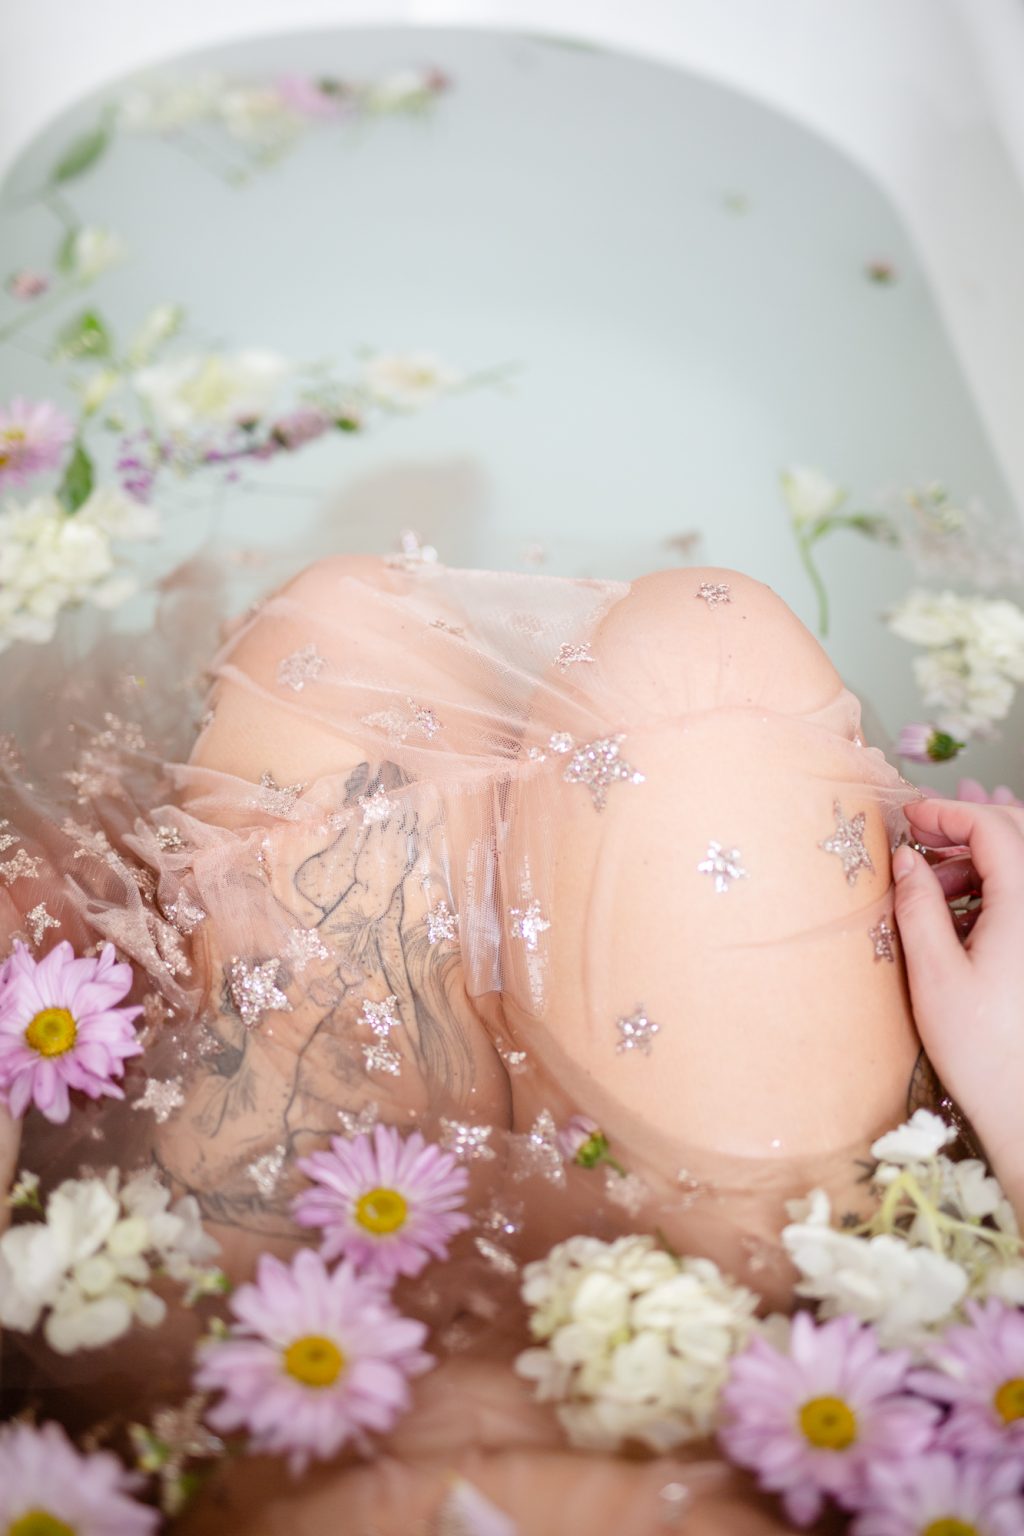 https://lilacandfernphotography.com/wp-content/uploads/2022/03/Boudoir-Fort-Collins-Colorado-Lilac-and-Fern-AS-Tub-37-1024x1536.jpg